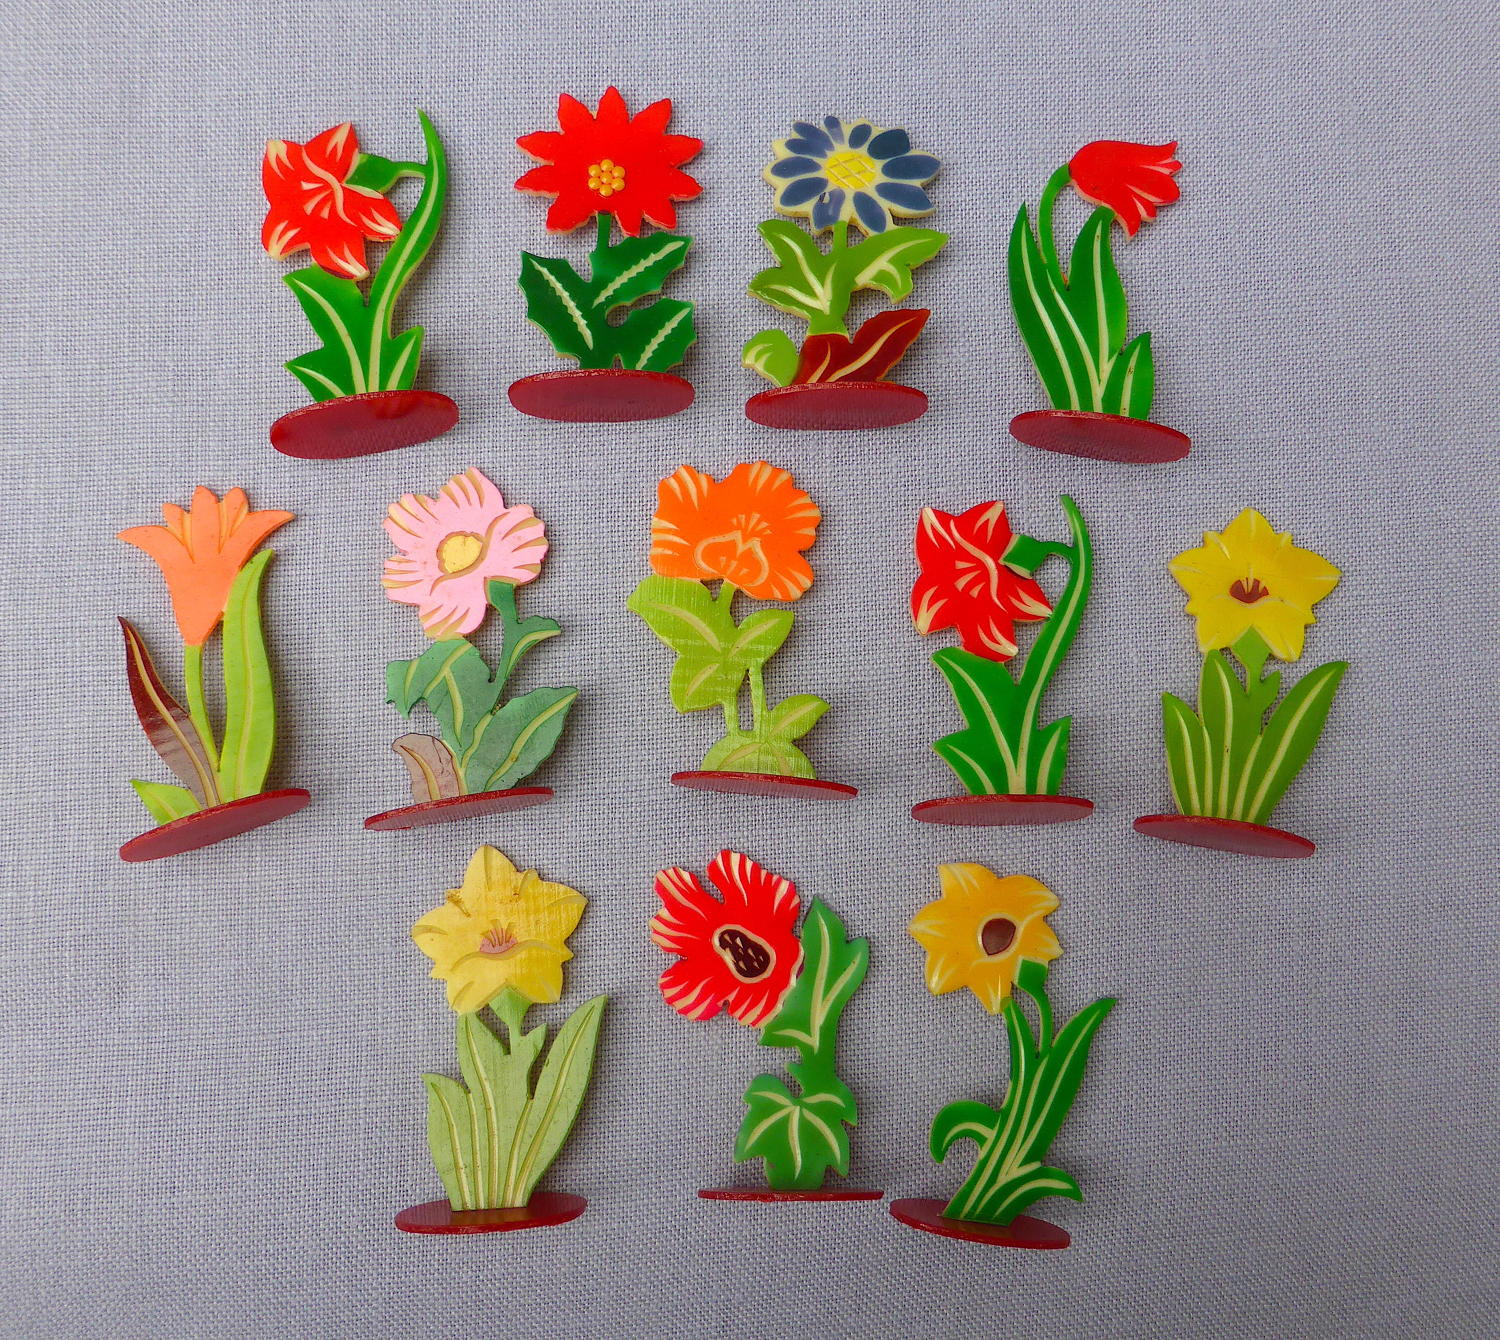 Set of 12 1930s celluloid flower place markers